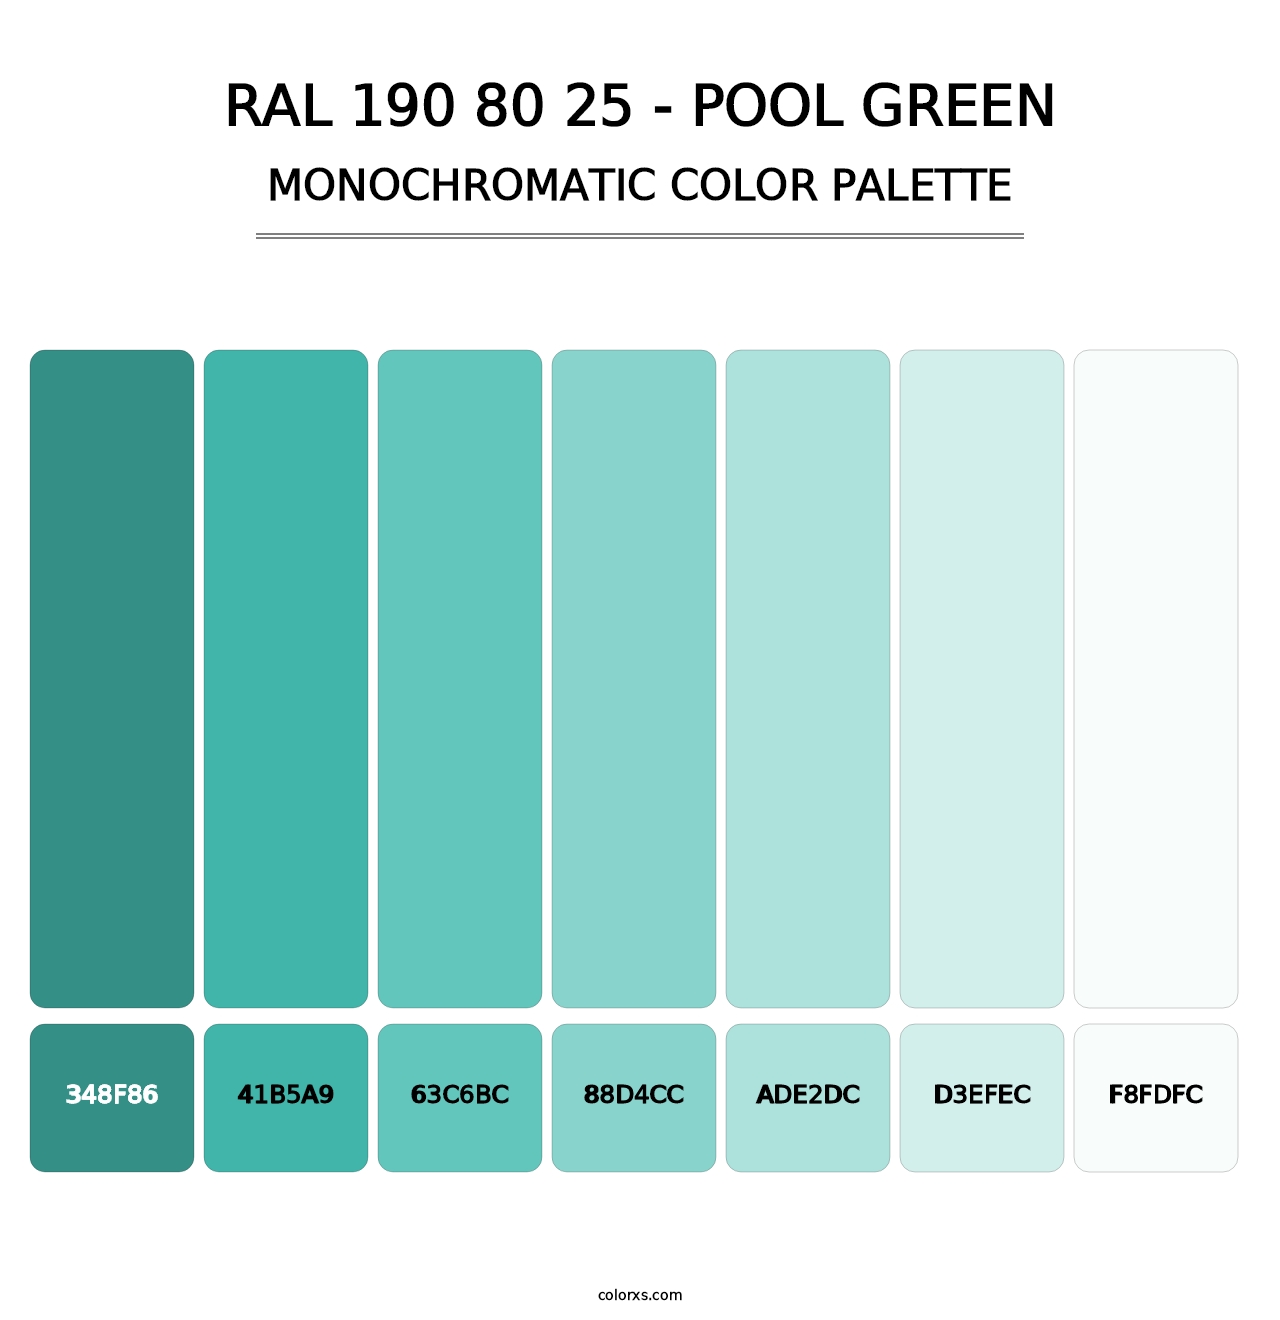 RAL 190 80 25 - Pool Green - Monochromatic Color Palette